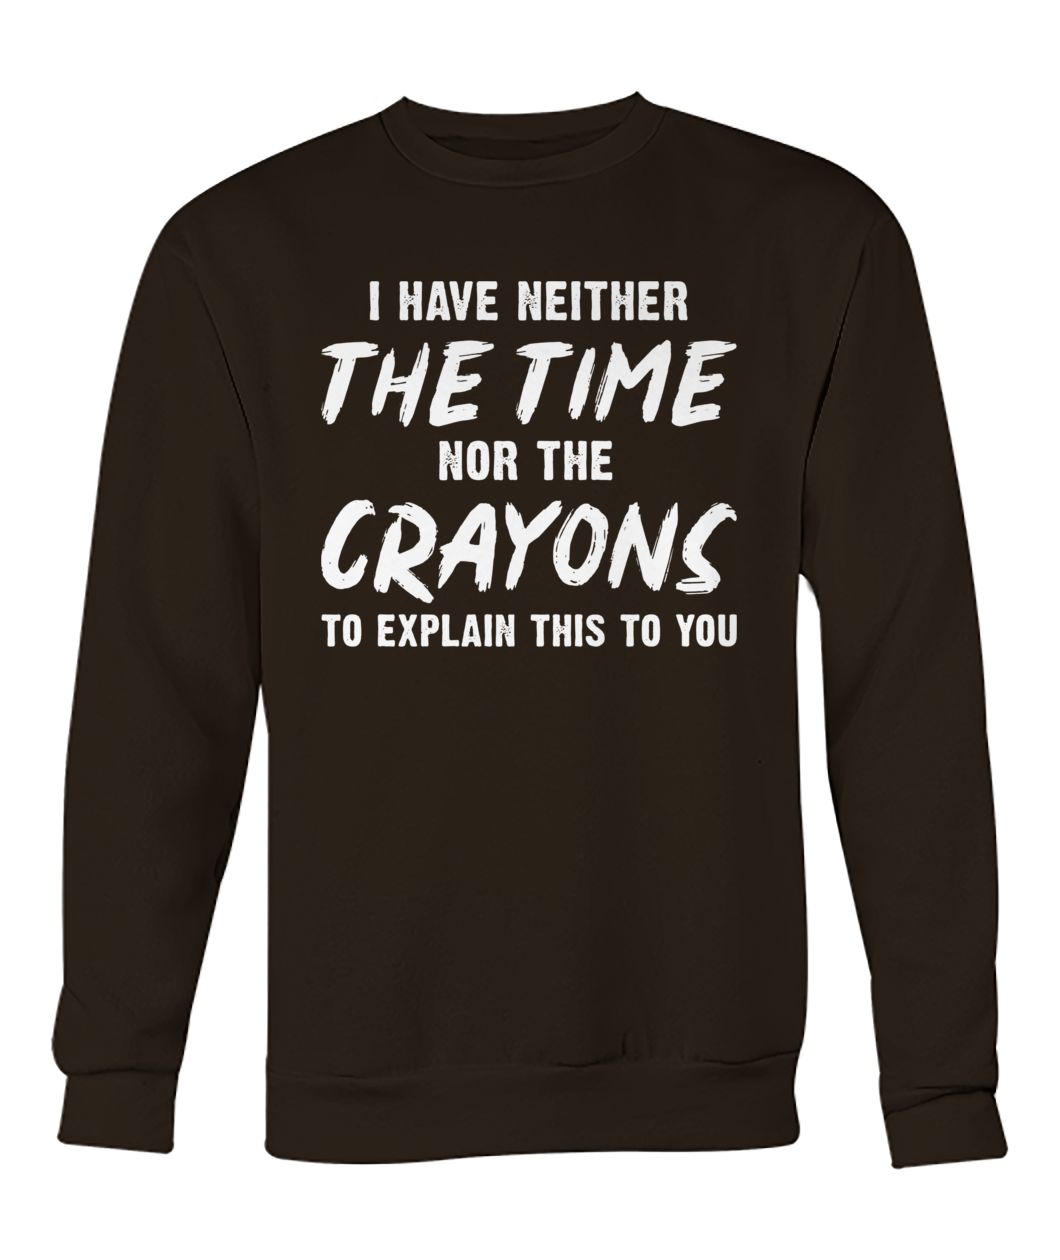 I have neither the time nor the crayons to explain this to you crew neck sweatshirt